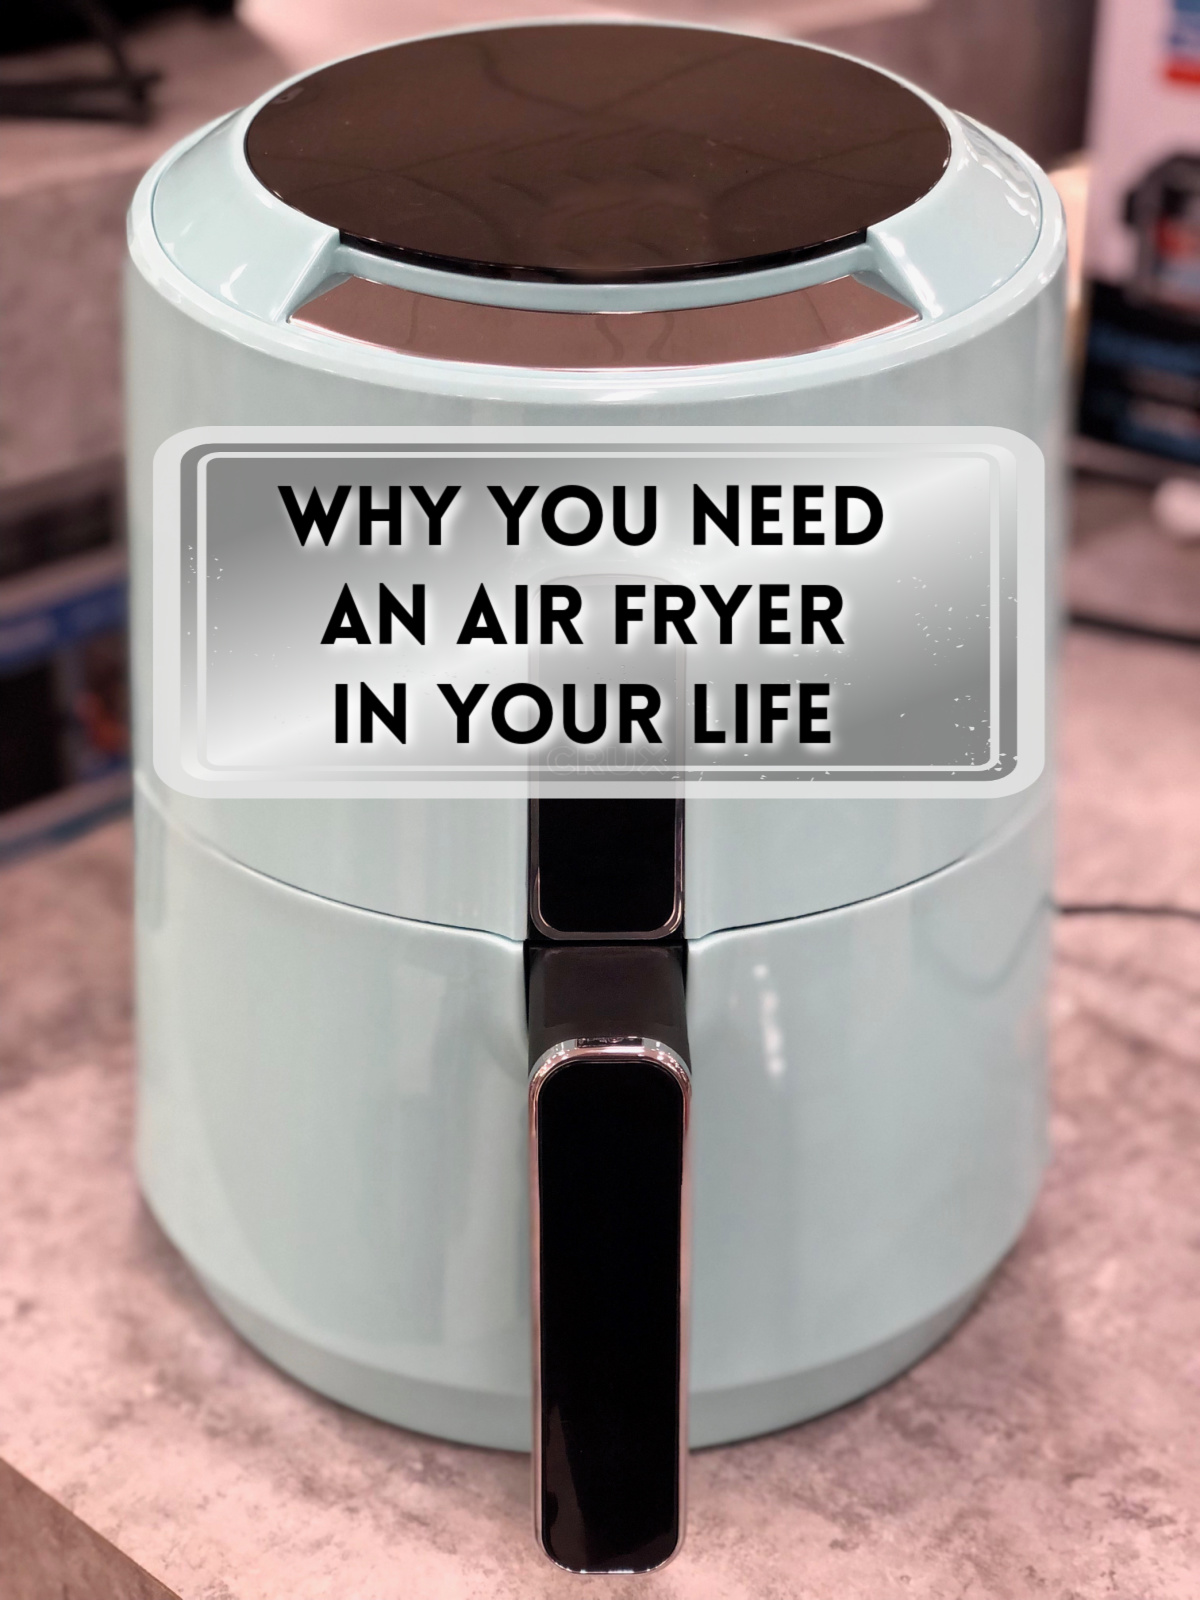 Photo of a light blue air fryer with the title "Why You Need an Air Fryer in Your Life"